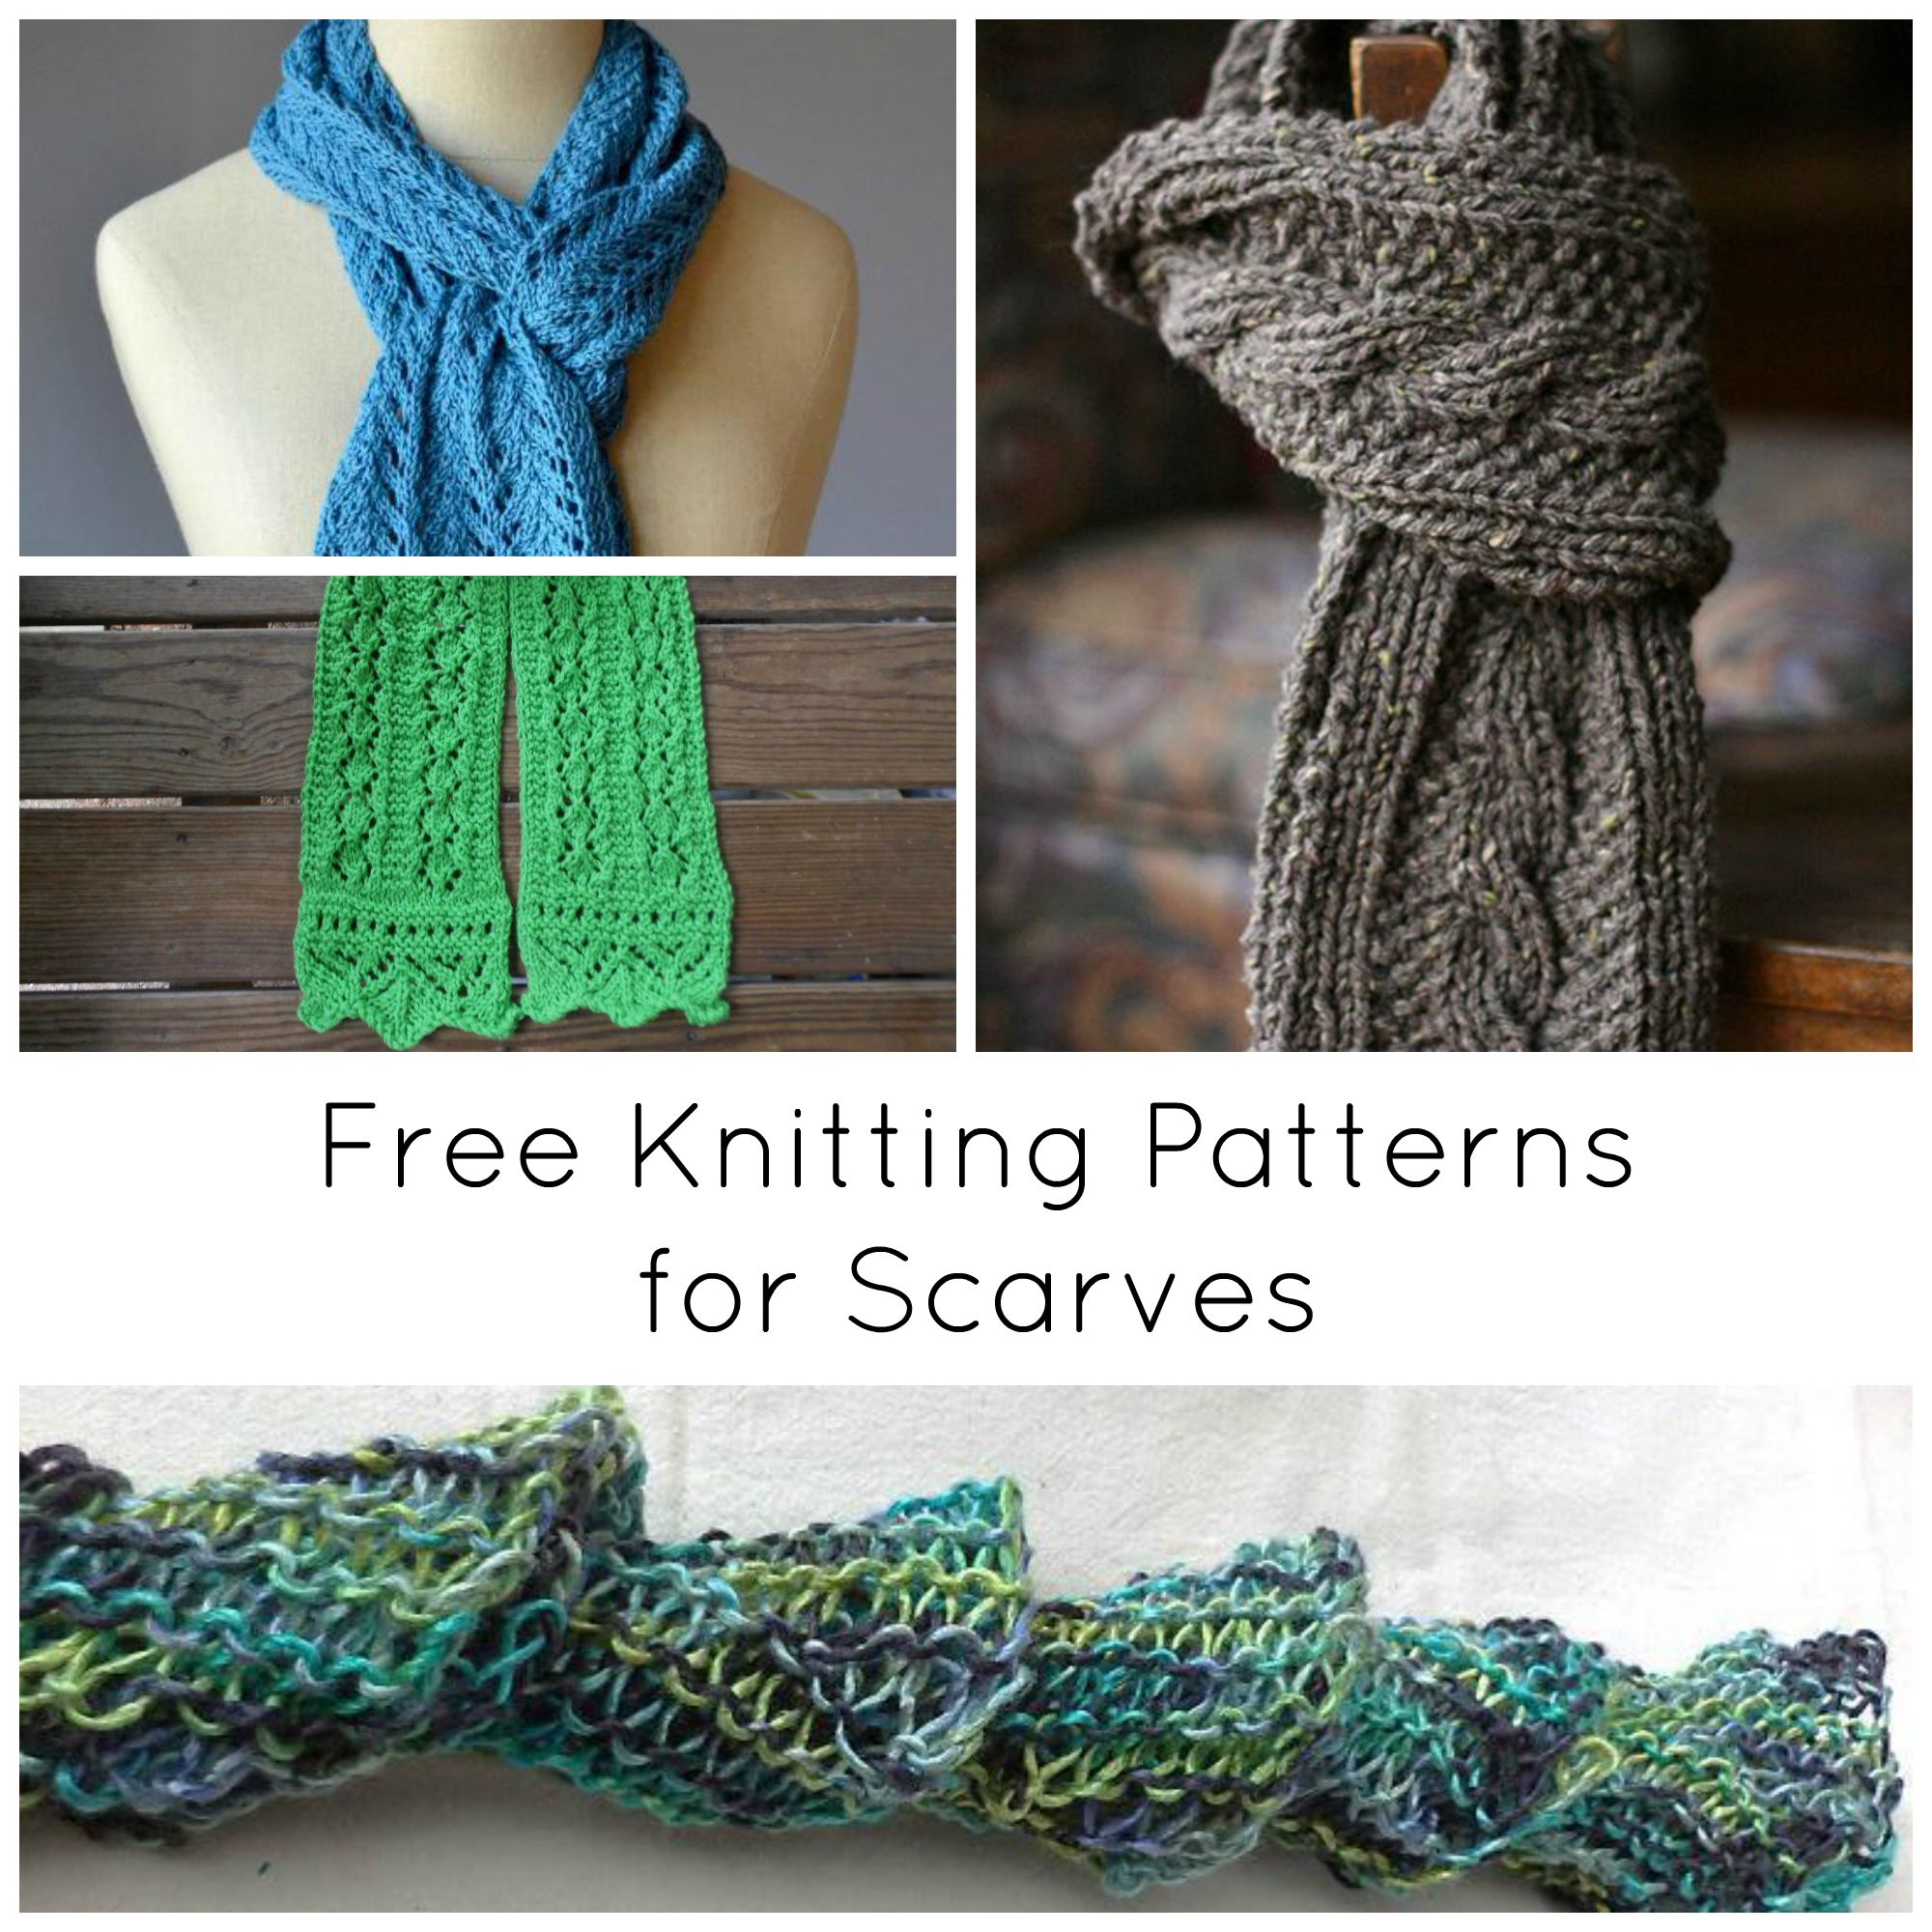 How To Knit A Ruffle Scarf Free Pattern 8 Gorgeous Free Knitting Patterns For Scarves